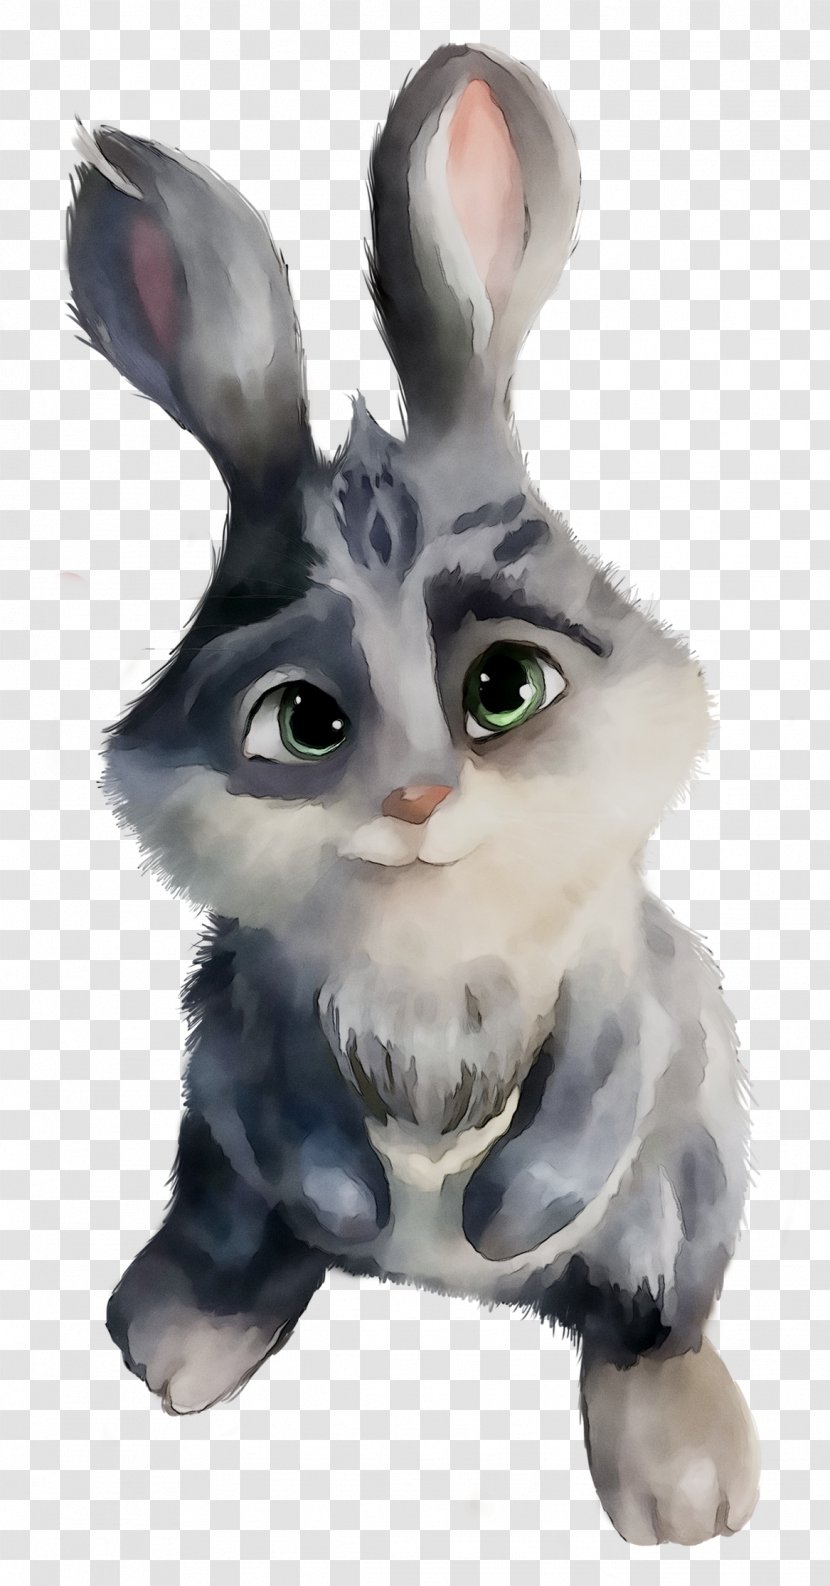 Whiskers Domestic Rabbit Short-haired Cat Hare - Easter Bunny Transparent PNG